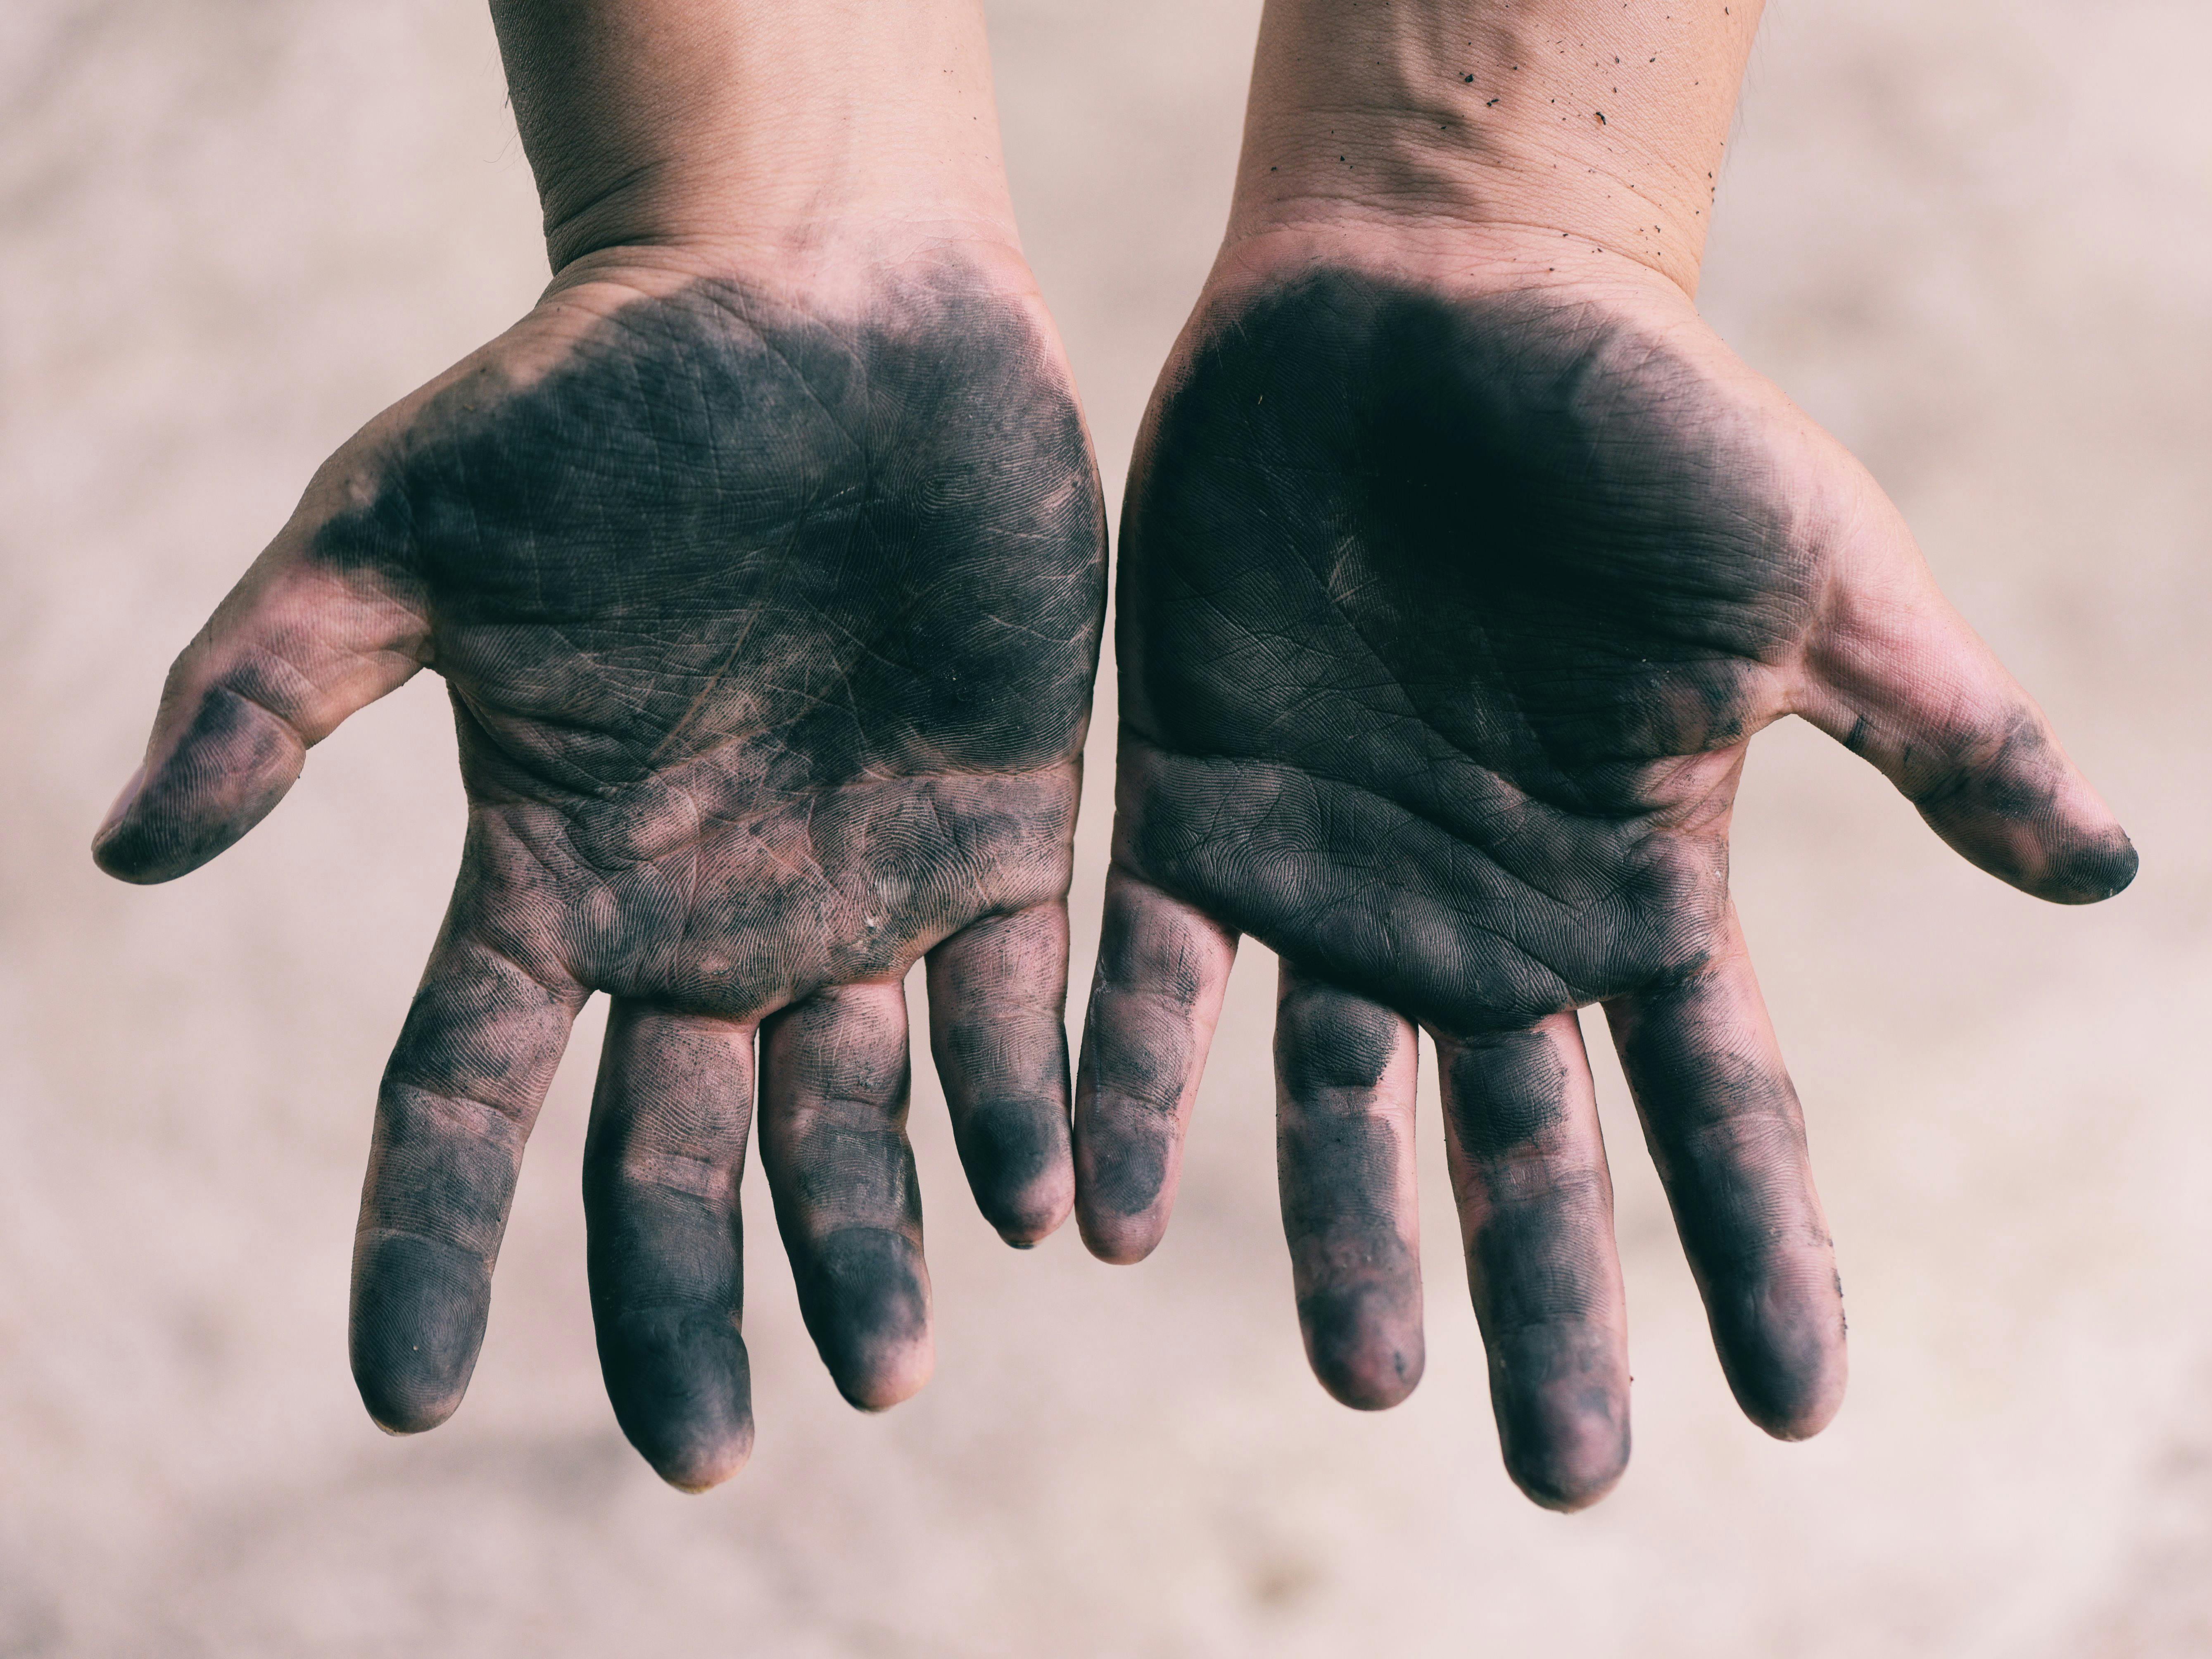 Dirty hands worker hands man / Open hands stained 